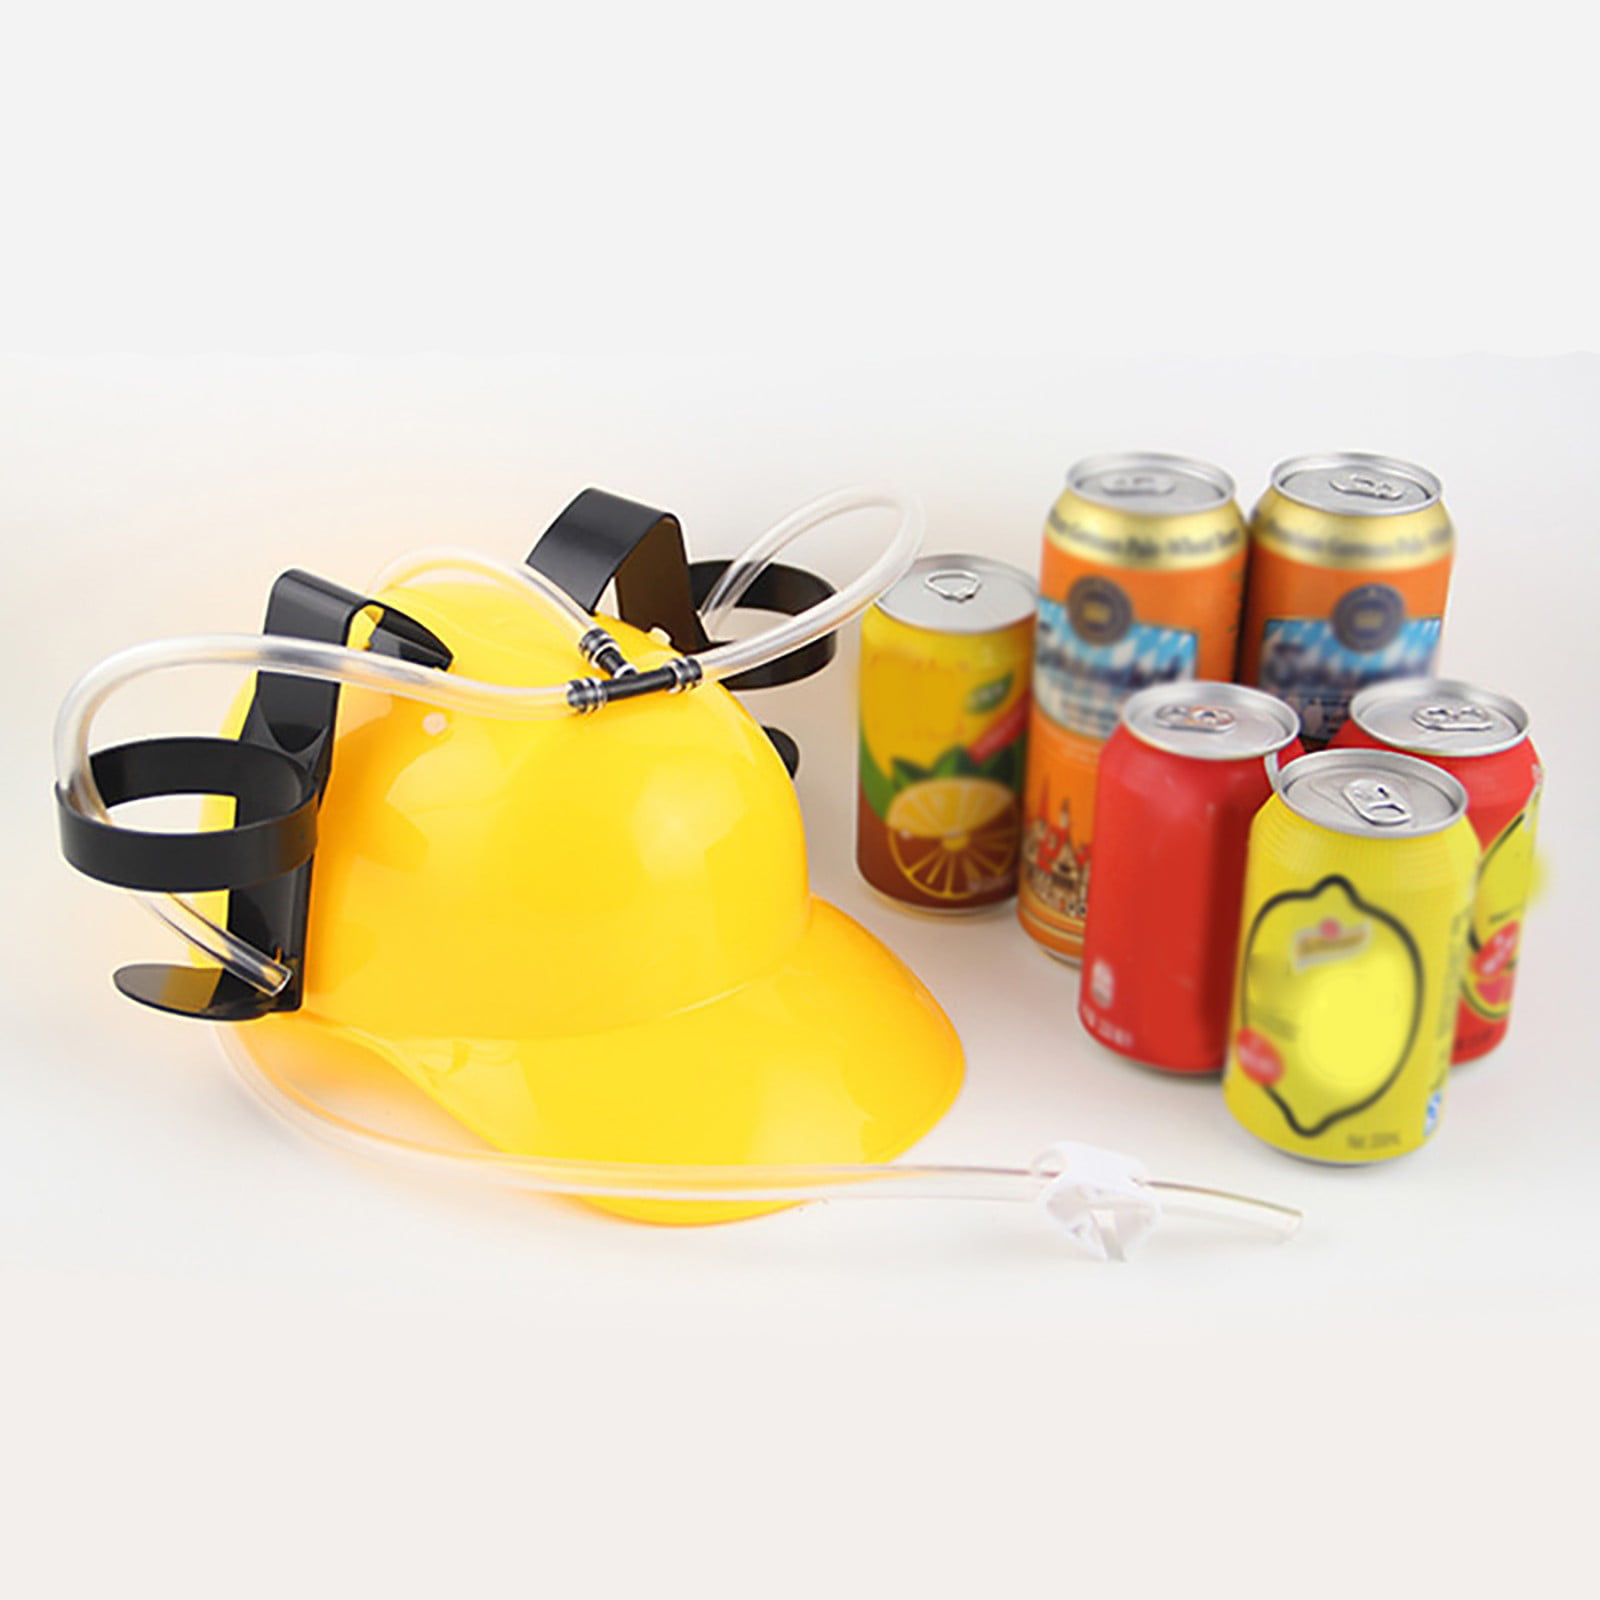 Douhoow Miners Drinking Hat Lazy lounge Beer Soda Guzzler Helmet Creative  Party Handsfree Drink Toy 